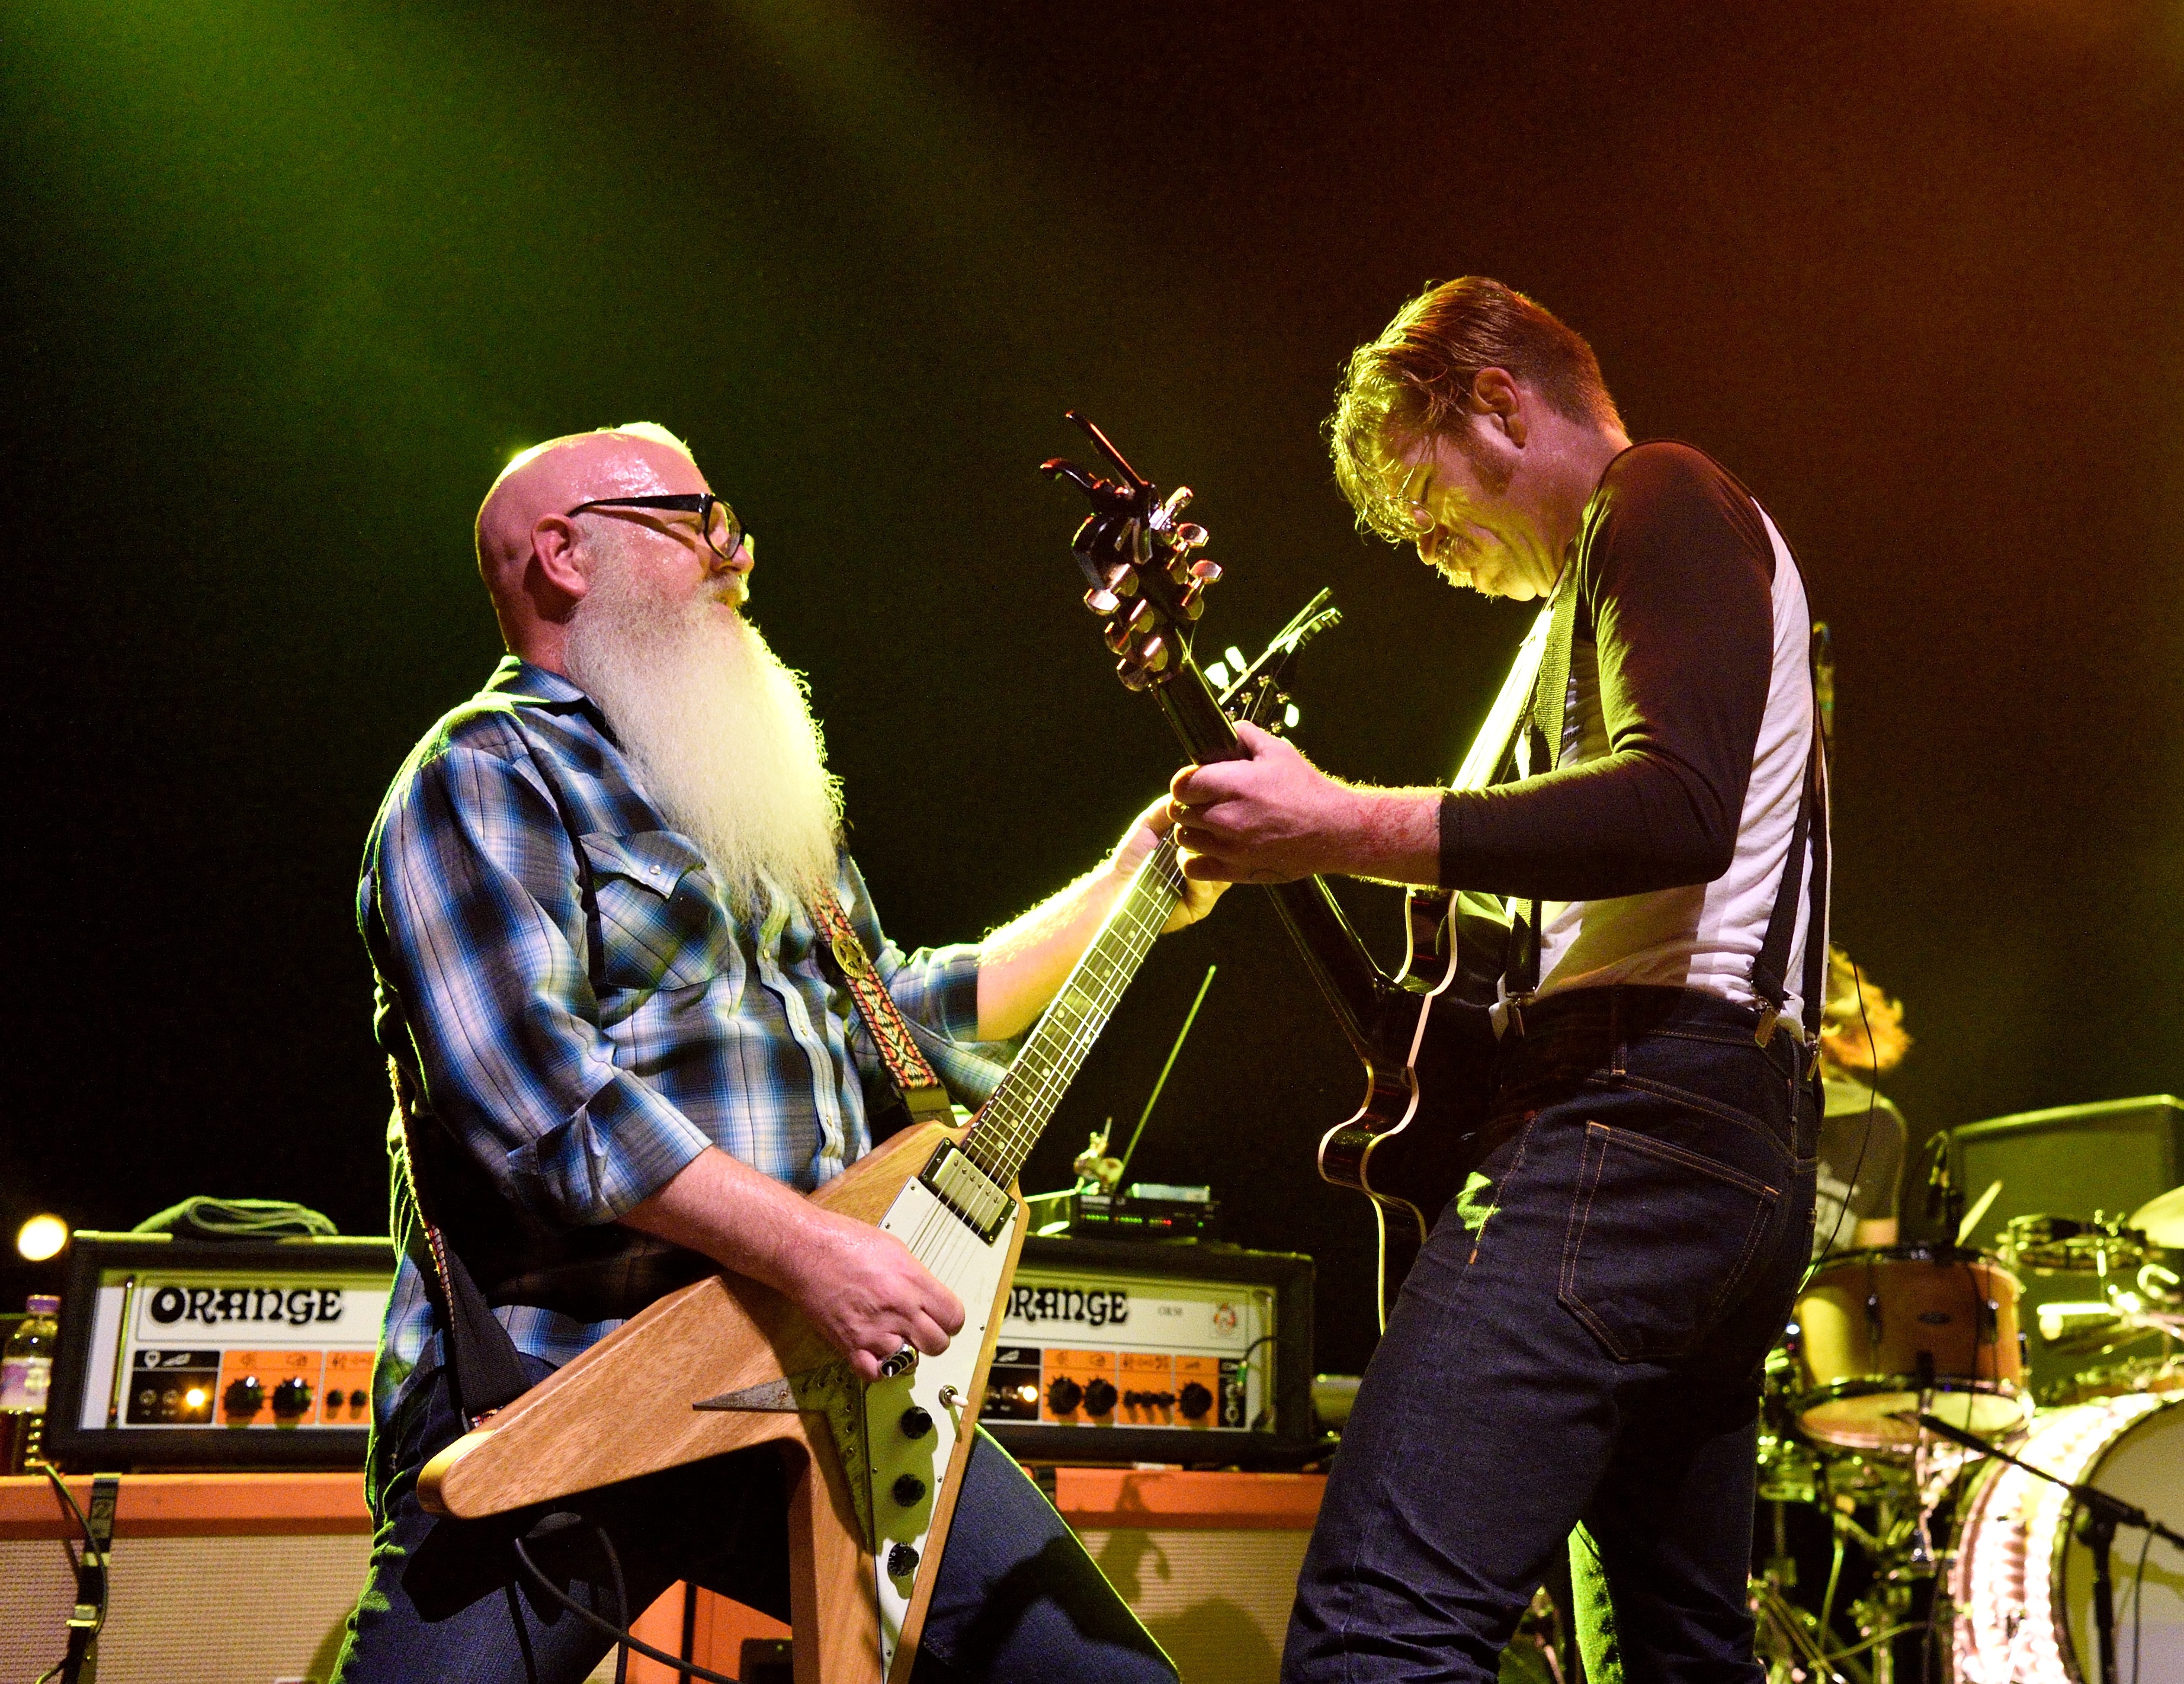 From left, Dave Catching and Jesse Hughes of Eagles of Death Metal perform at The Forum on Nov. 5, 2015 in London. Gust Stewart-Getty Images (Gus Stewart—Getty Images)